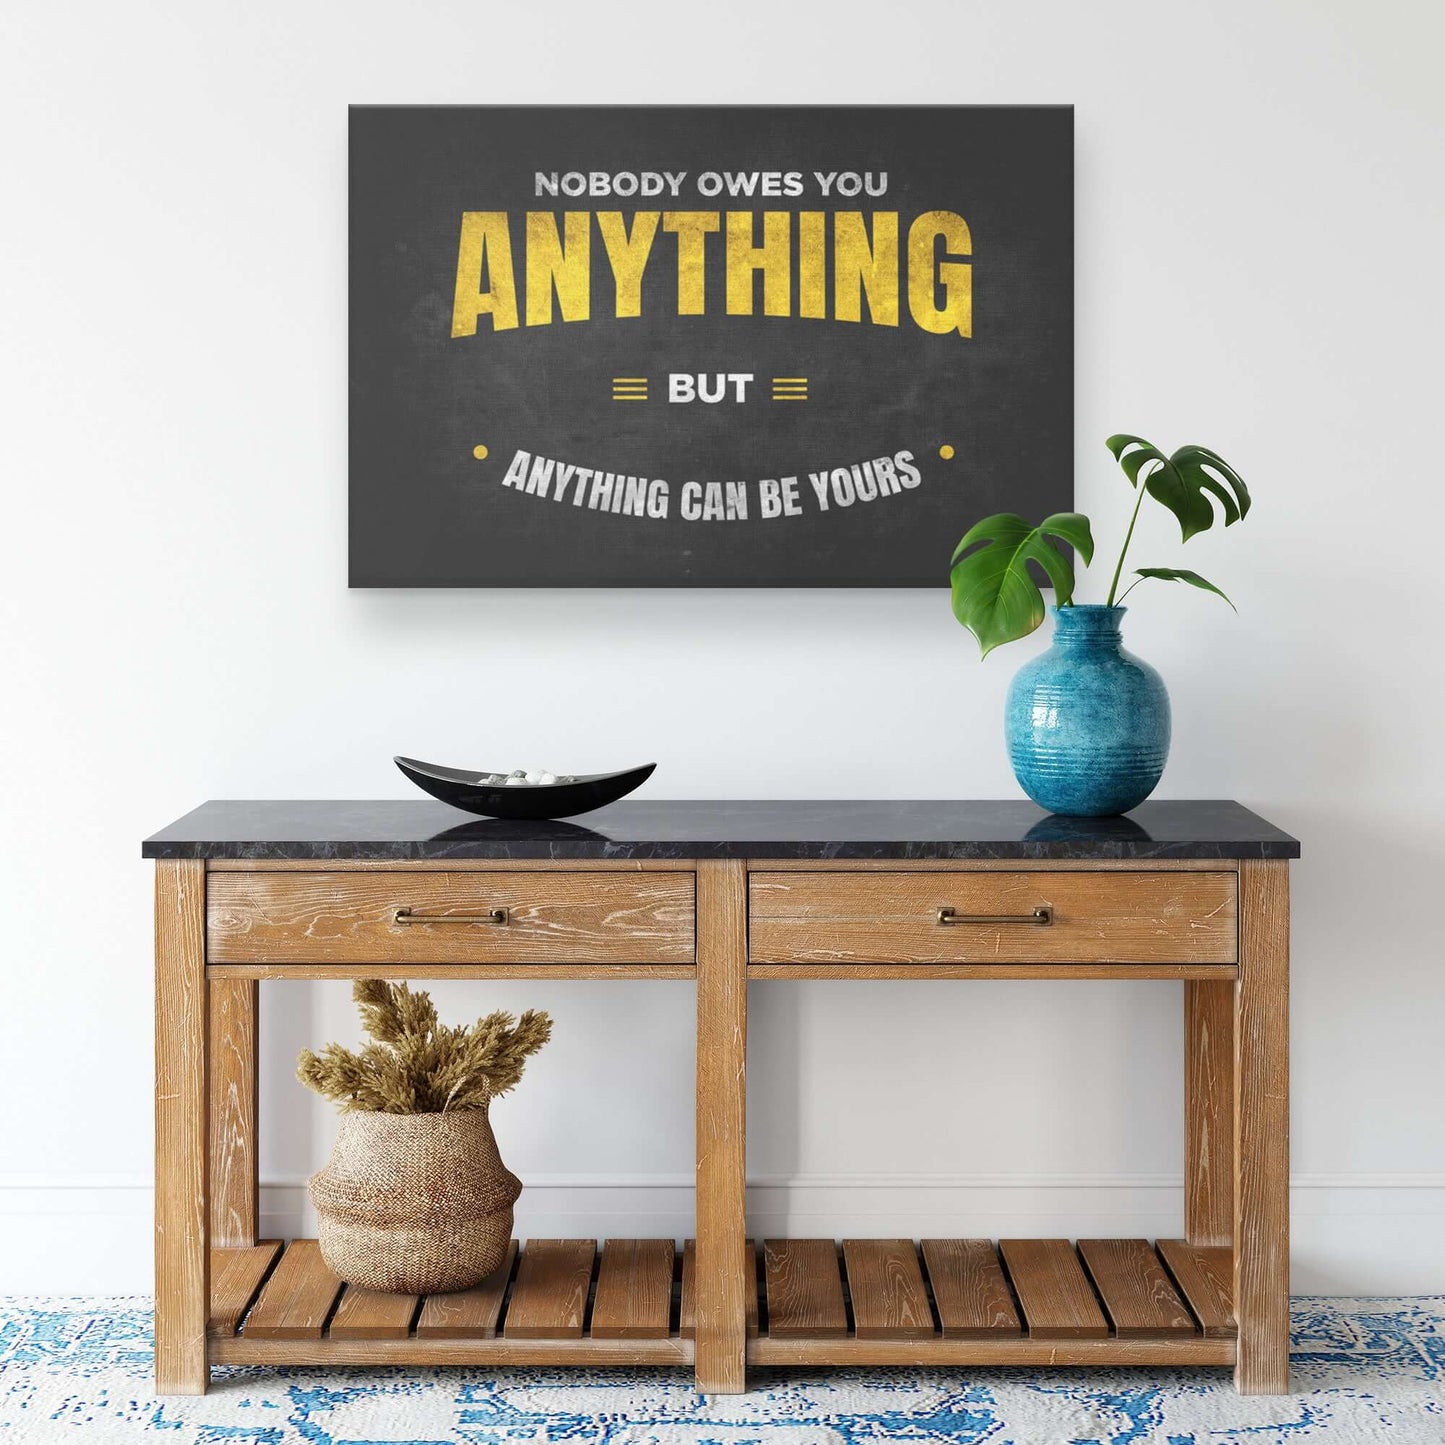 Anything Can Be Yours